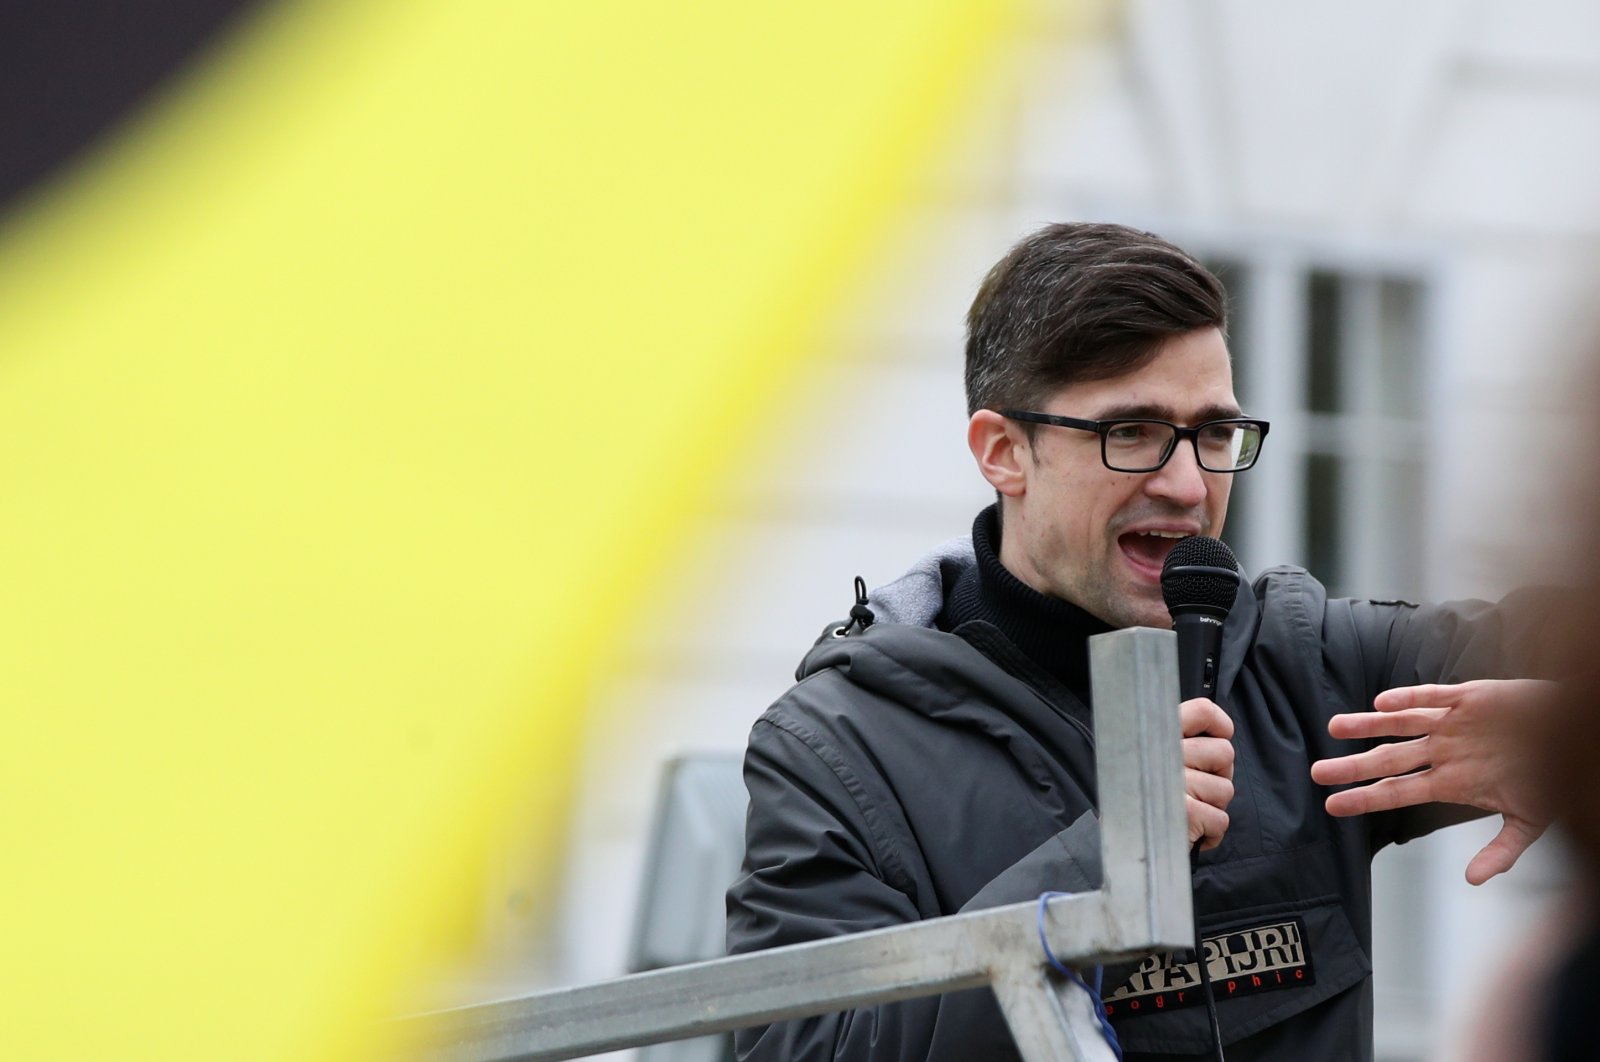 Leader of Austria's far-right Identitarian Movement Martin Sellner speaks during a protest against a police raid at his house, outside the Justice Ministry in Vienna, Austria, April 13, 2019. (Reuters Photo)